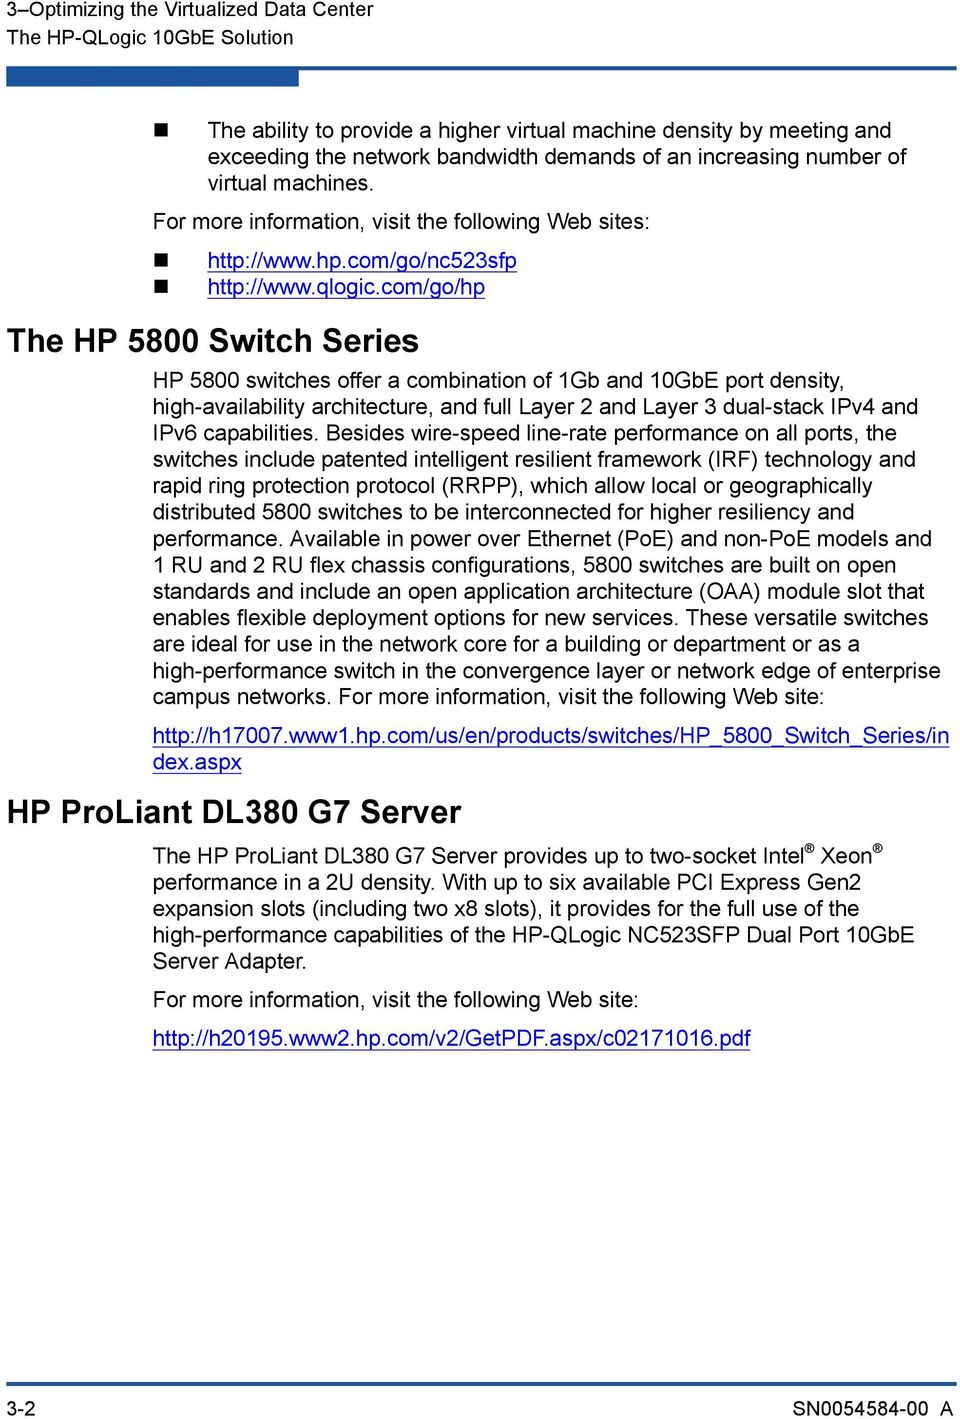 com/go/hp The HP 5800 Switch Series HP 5800 switches offer a combination of 1Gb and 10GbE port density, high-availability architecture, and full Layer 2 and Layer 3 dual-stack IPv4 and IPv6